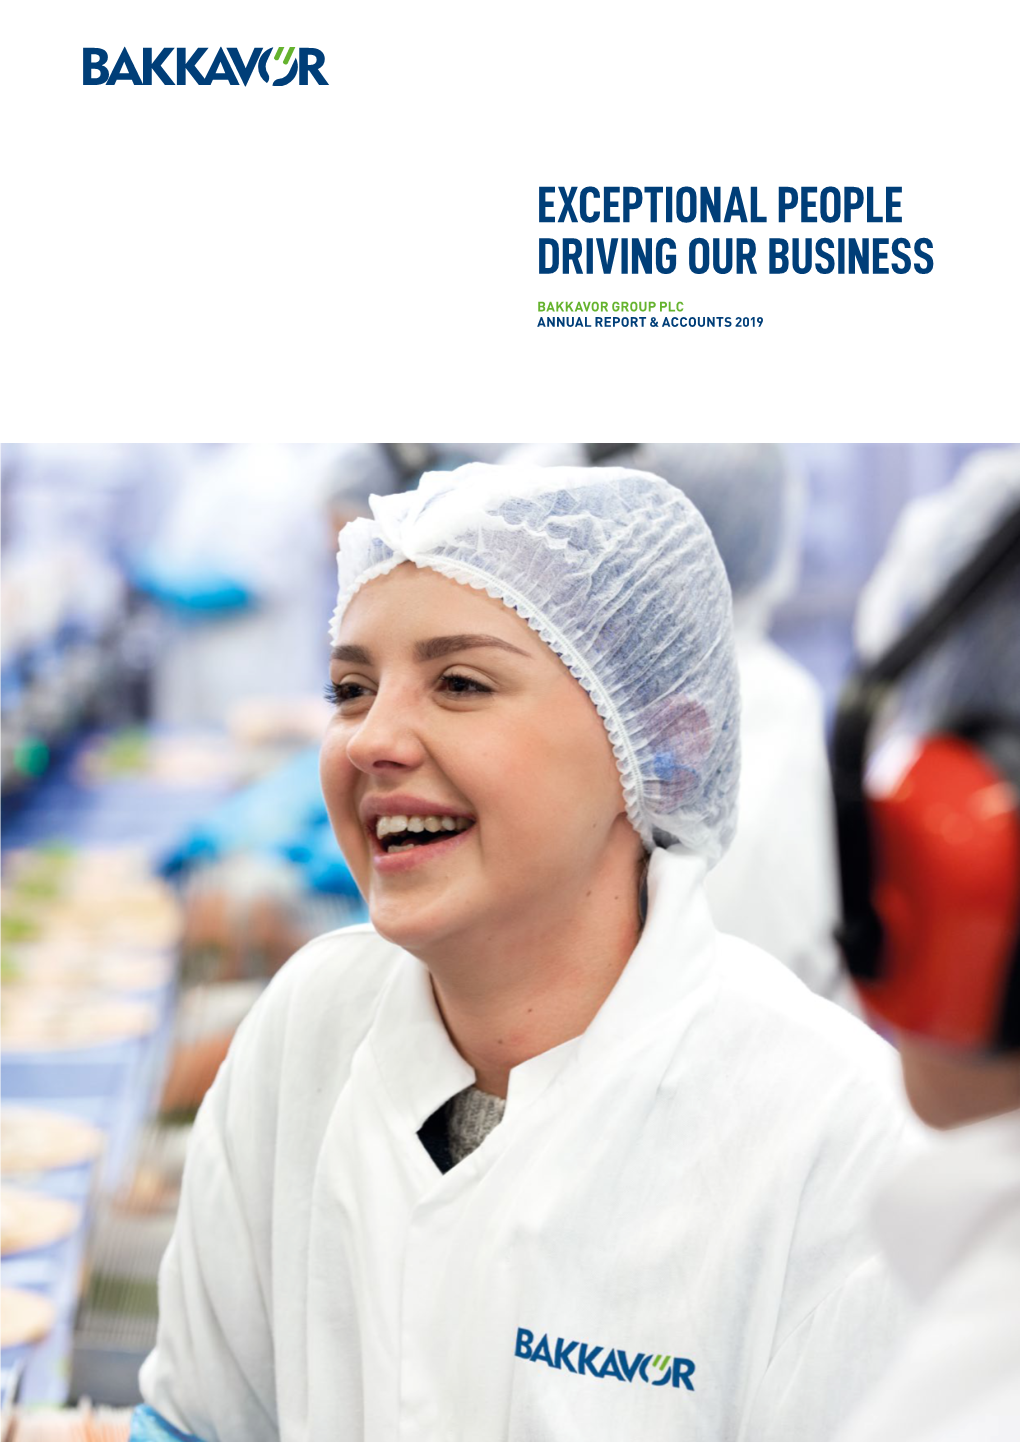 Bakkavor Group Plc Annual Report & Accounts 2019 It's Our Exceptional and Dedicated People Who Deliver Our Core Strategy of Long-Term Sustainable Growth